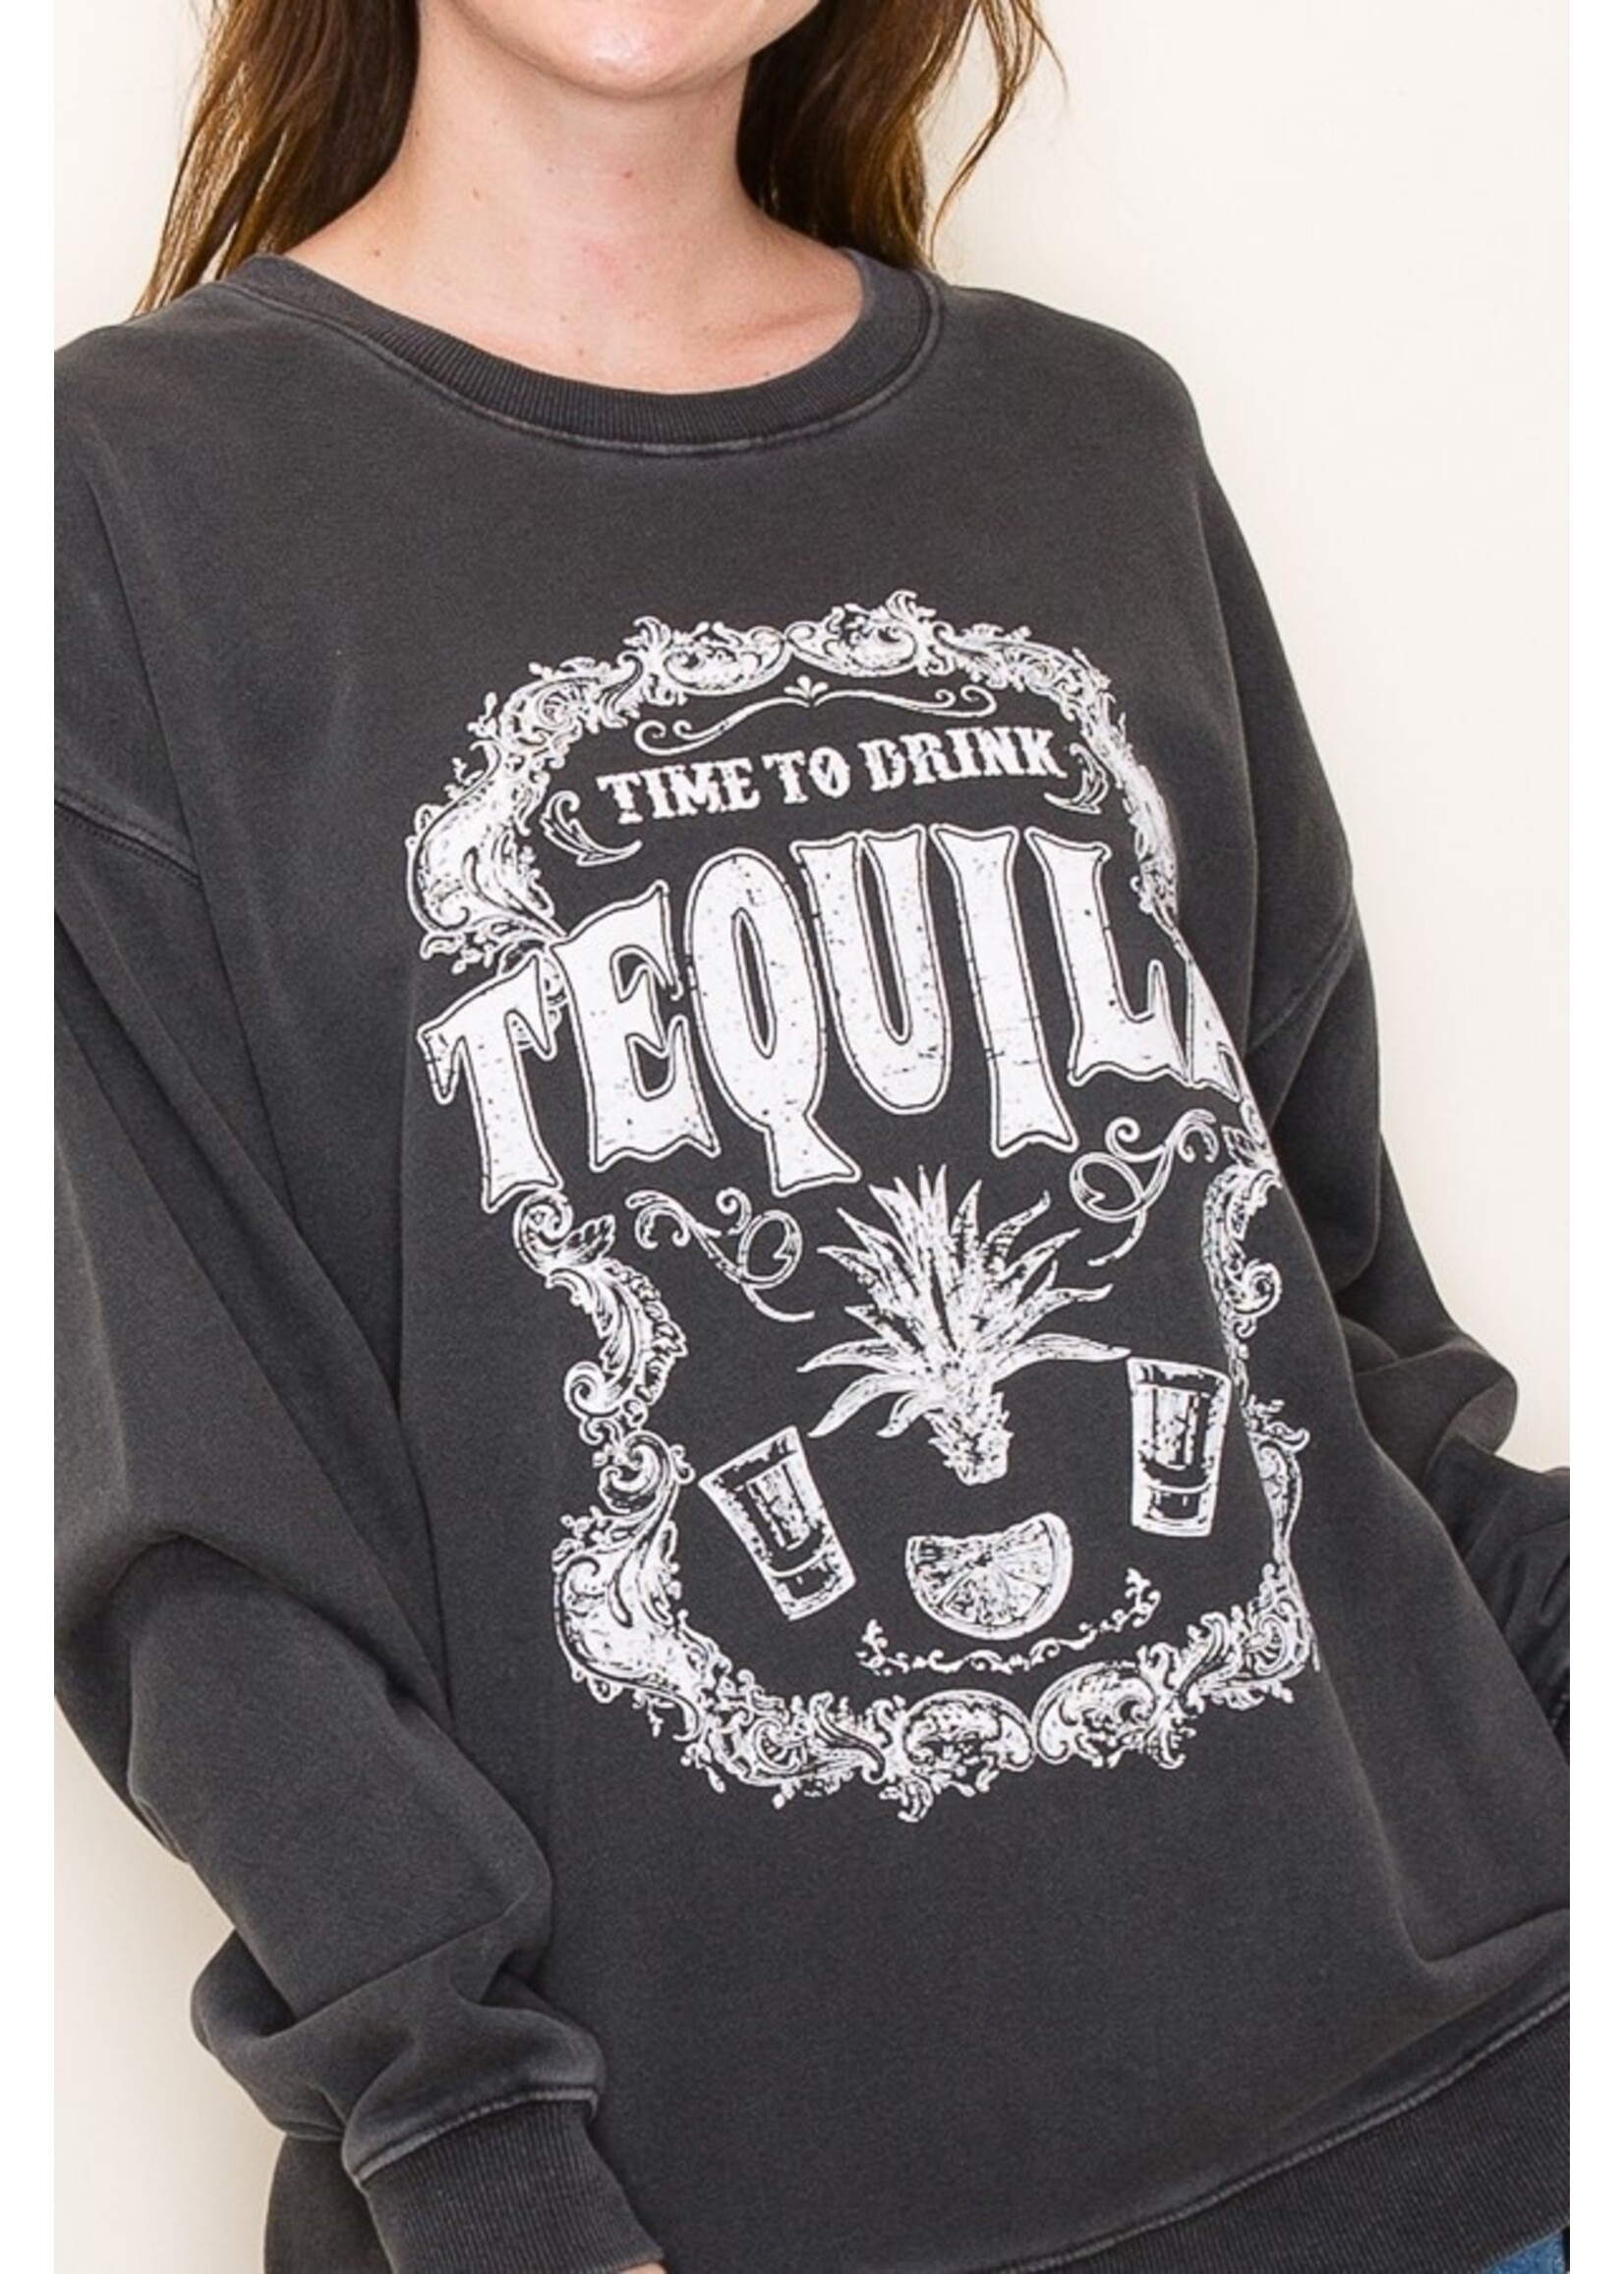 TIME TO DRINK TEQUILA SWEATSHIRT